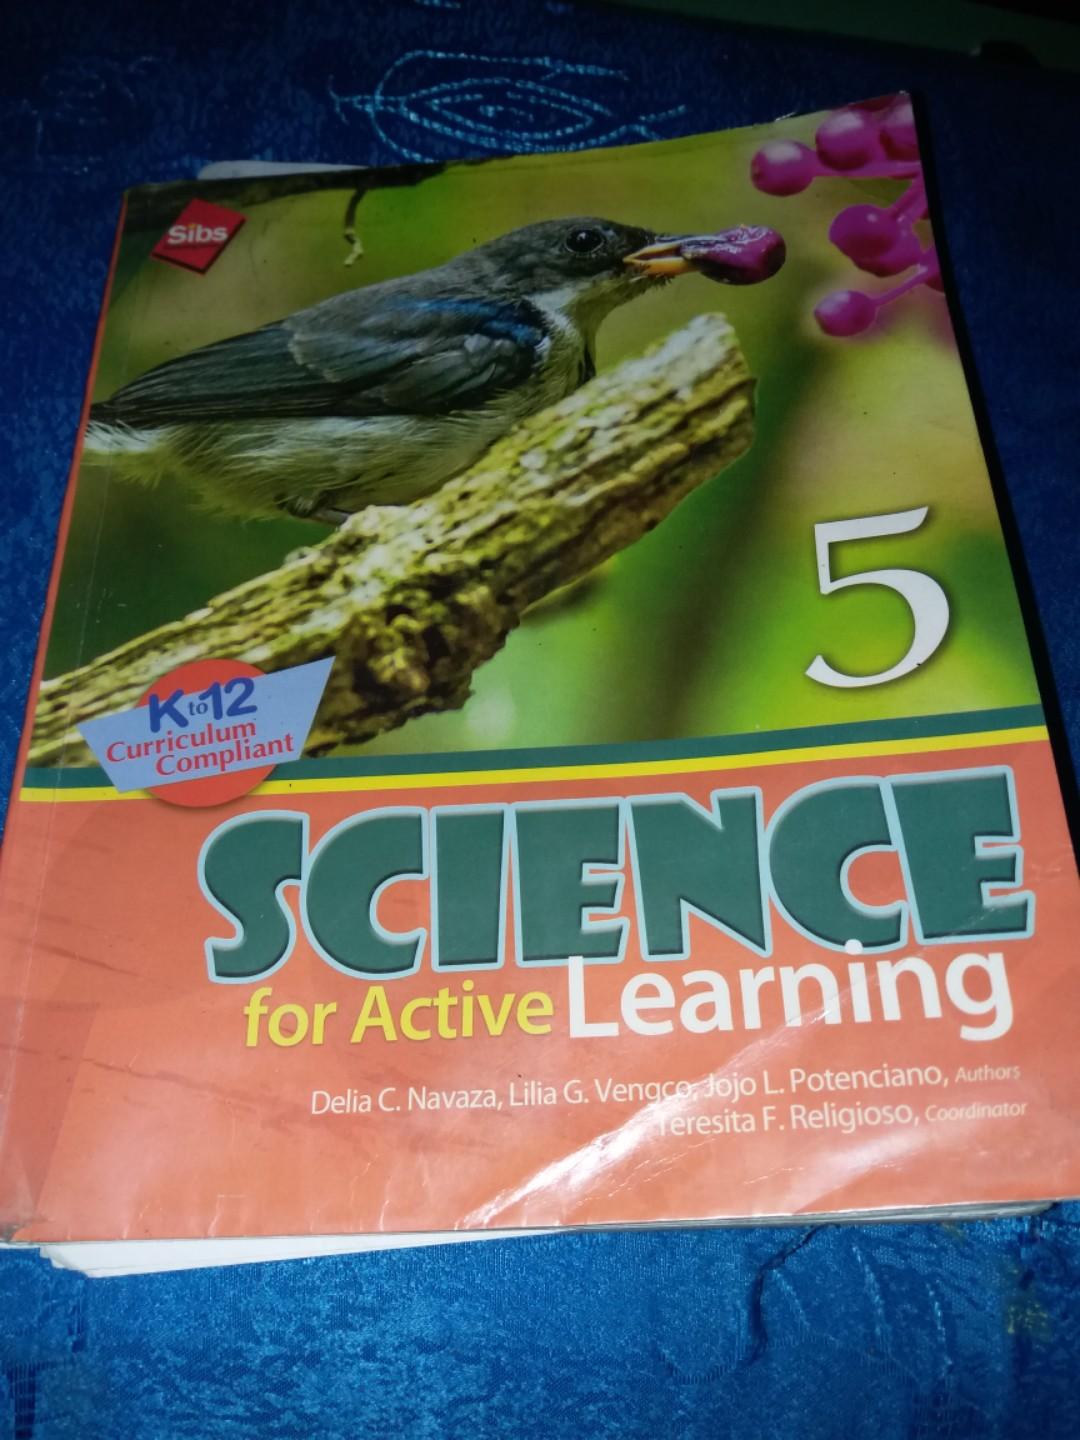 grade-5-science-book-hobbies-toys-books-magazines-textbooks-on